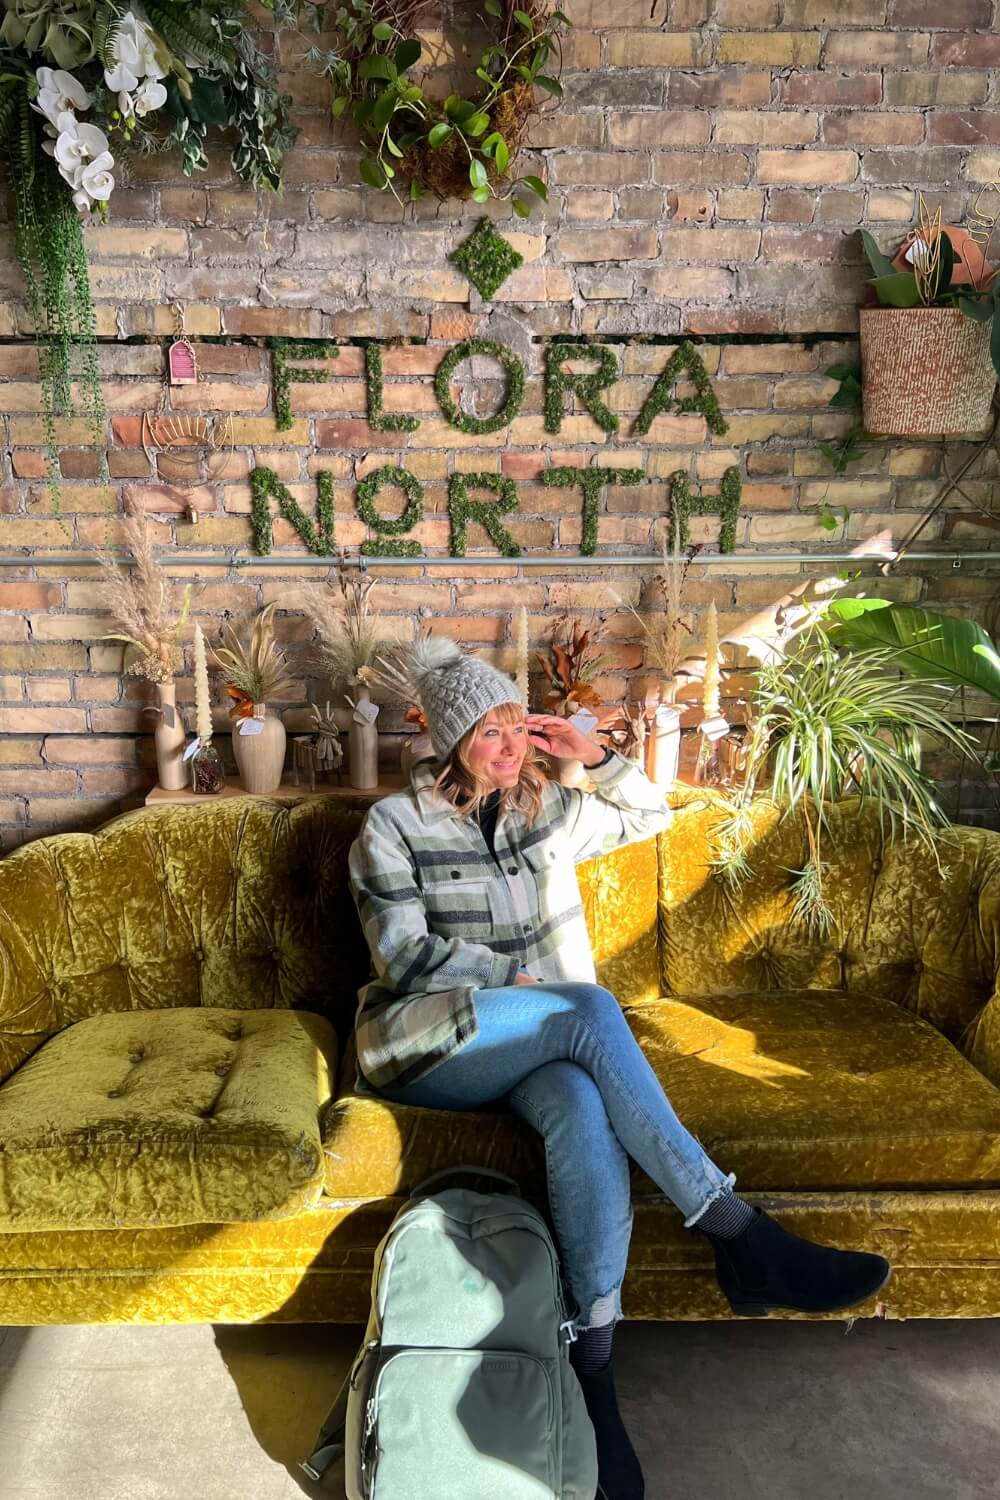 Me sitting on a green coach in front of a brick wall with Flora North spelled out in plants.